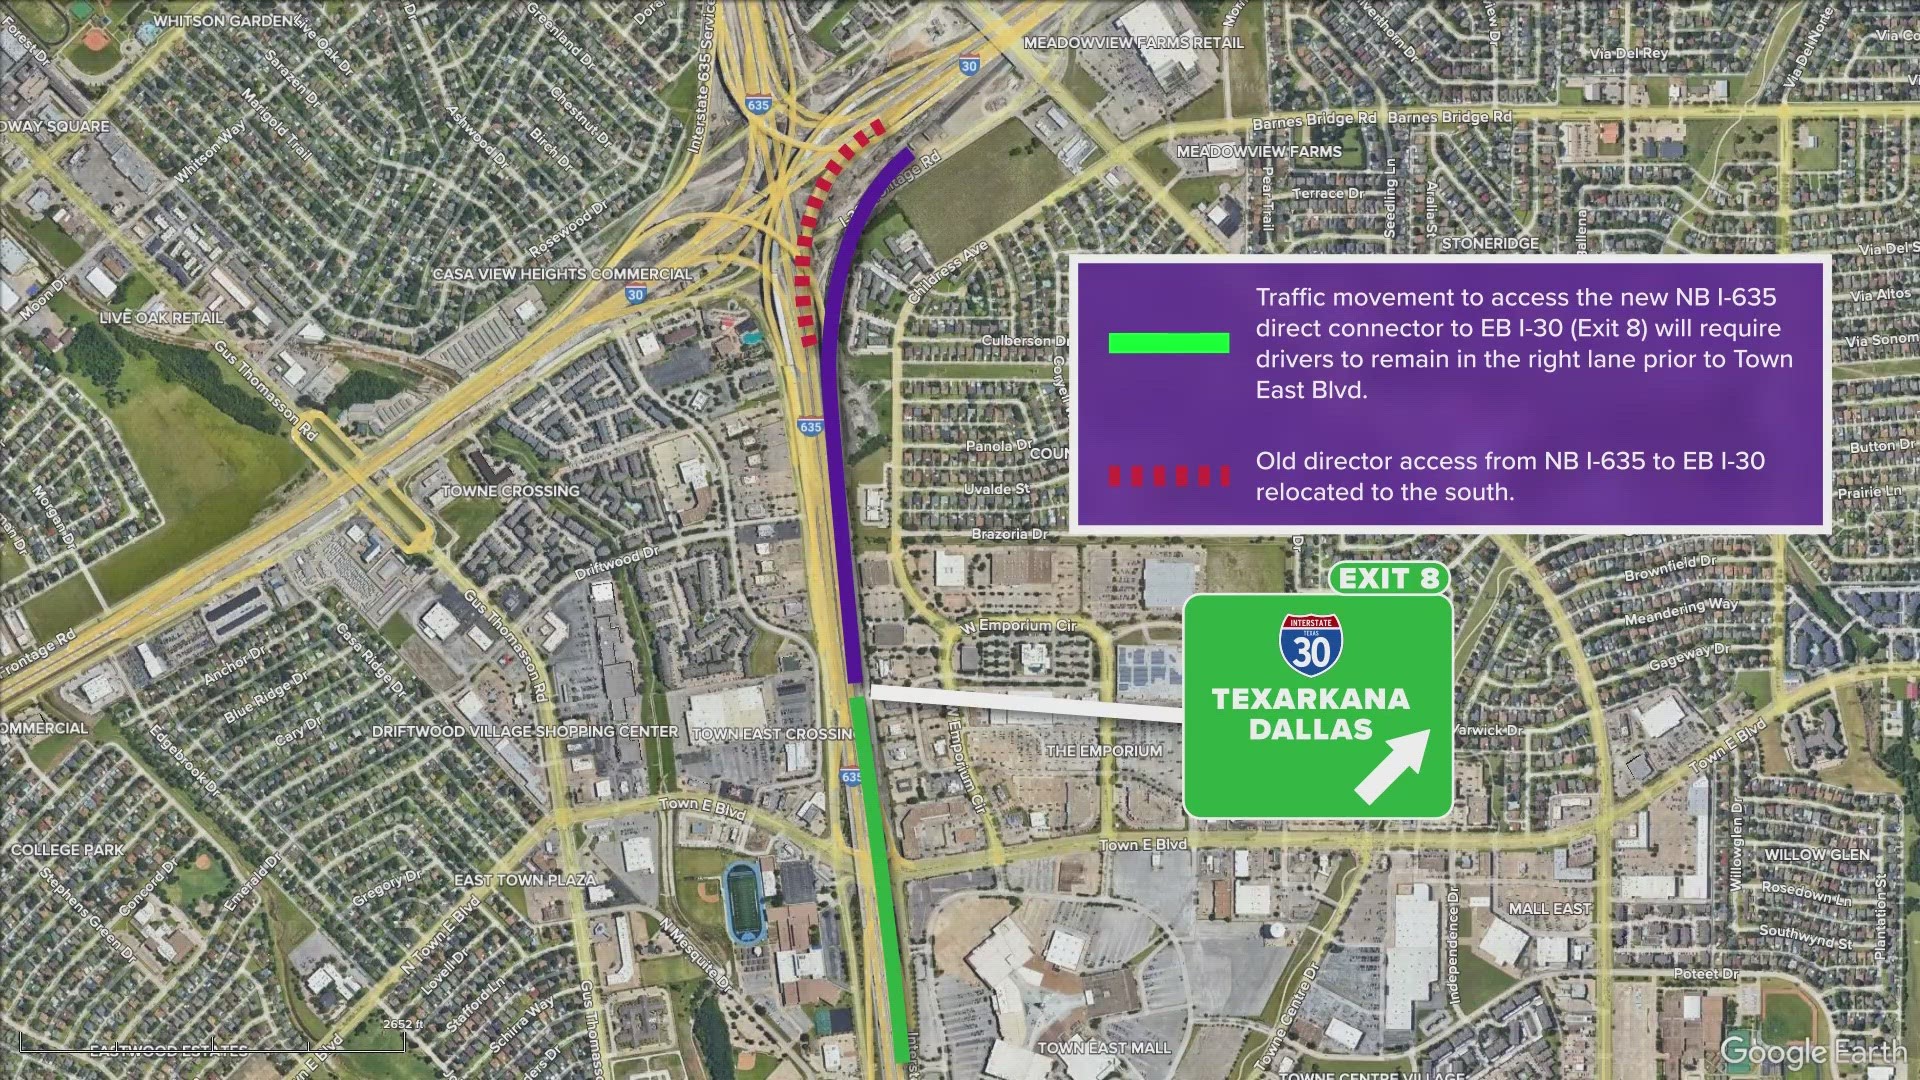 Drivers will access the new direct connector by remaining in the right lane along northbound I-635 following signs labeled for Exit 8, towards Texarkana.